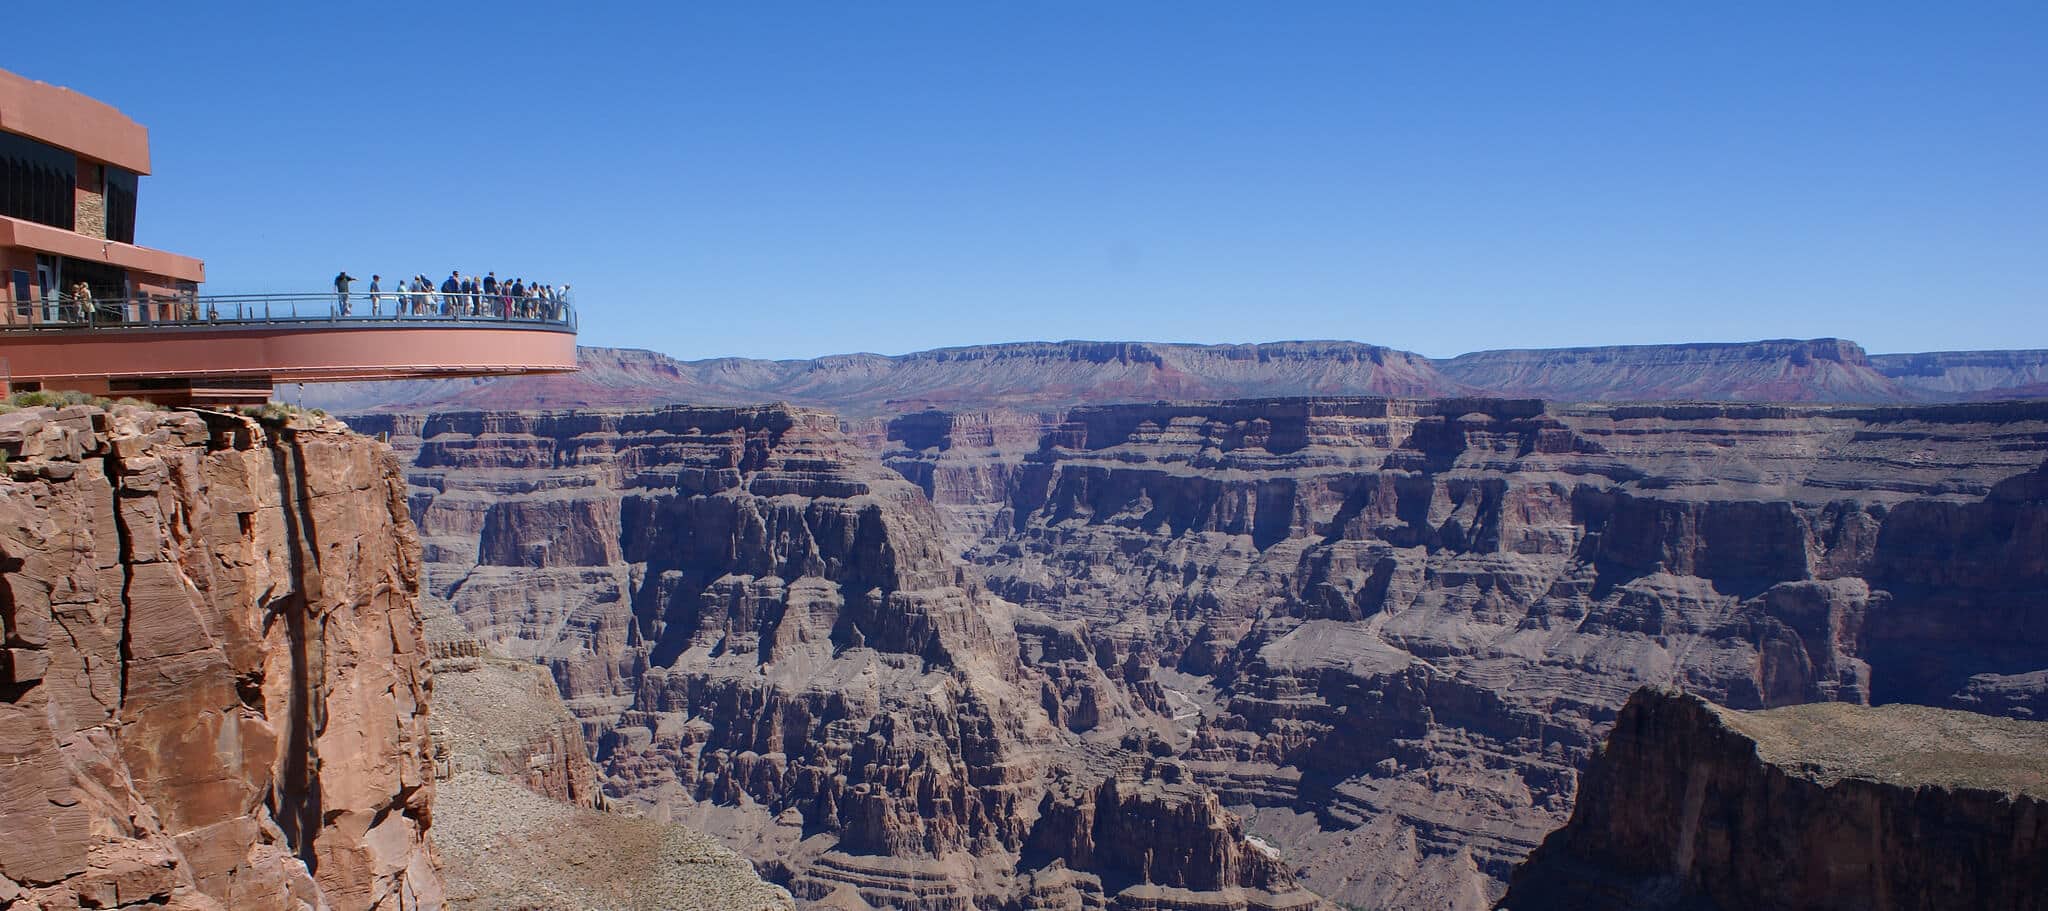 Grand Canyon West: Experience Grand Canyon West Rim